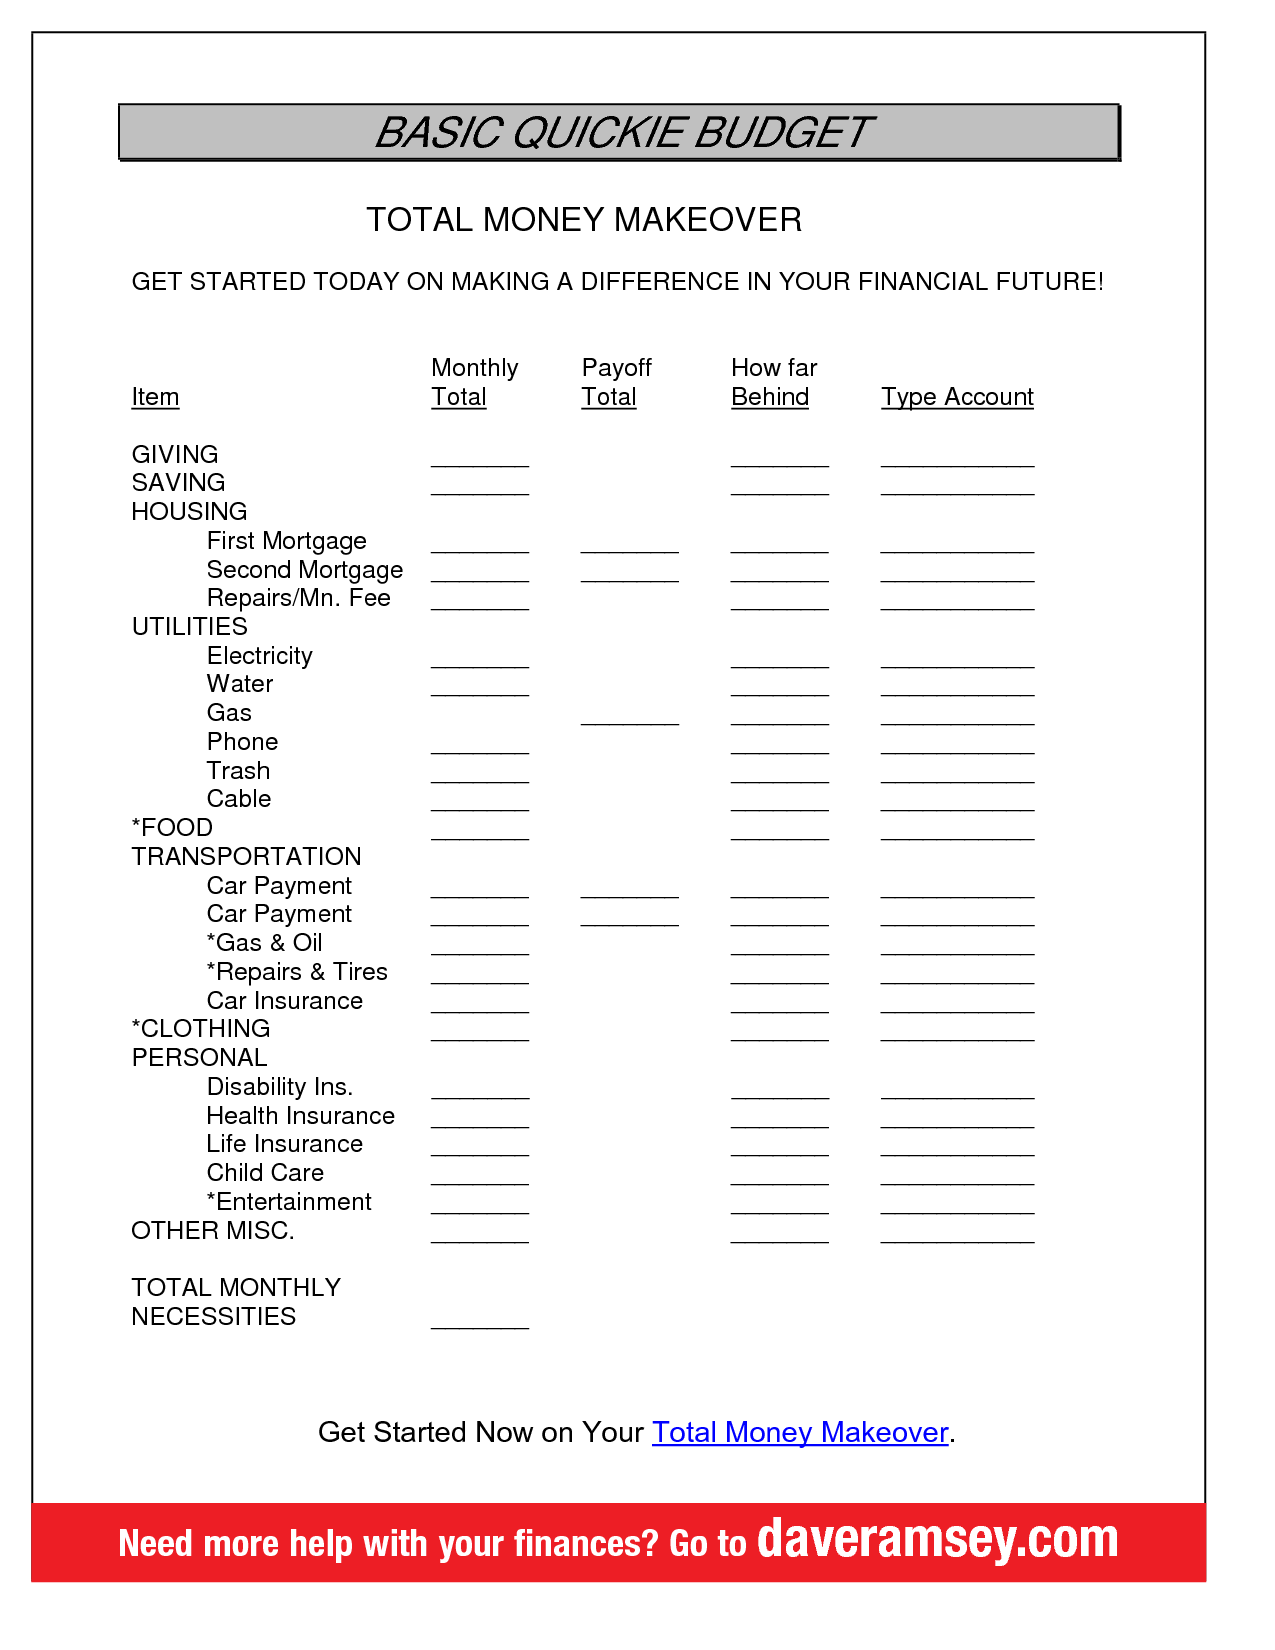 Dave Ramsey Budget Template BASIC QUICKIE BUDGET TOTAL Dave Ramsey 